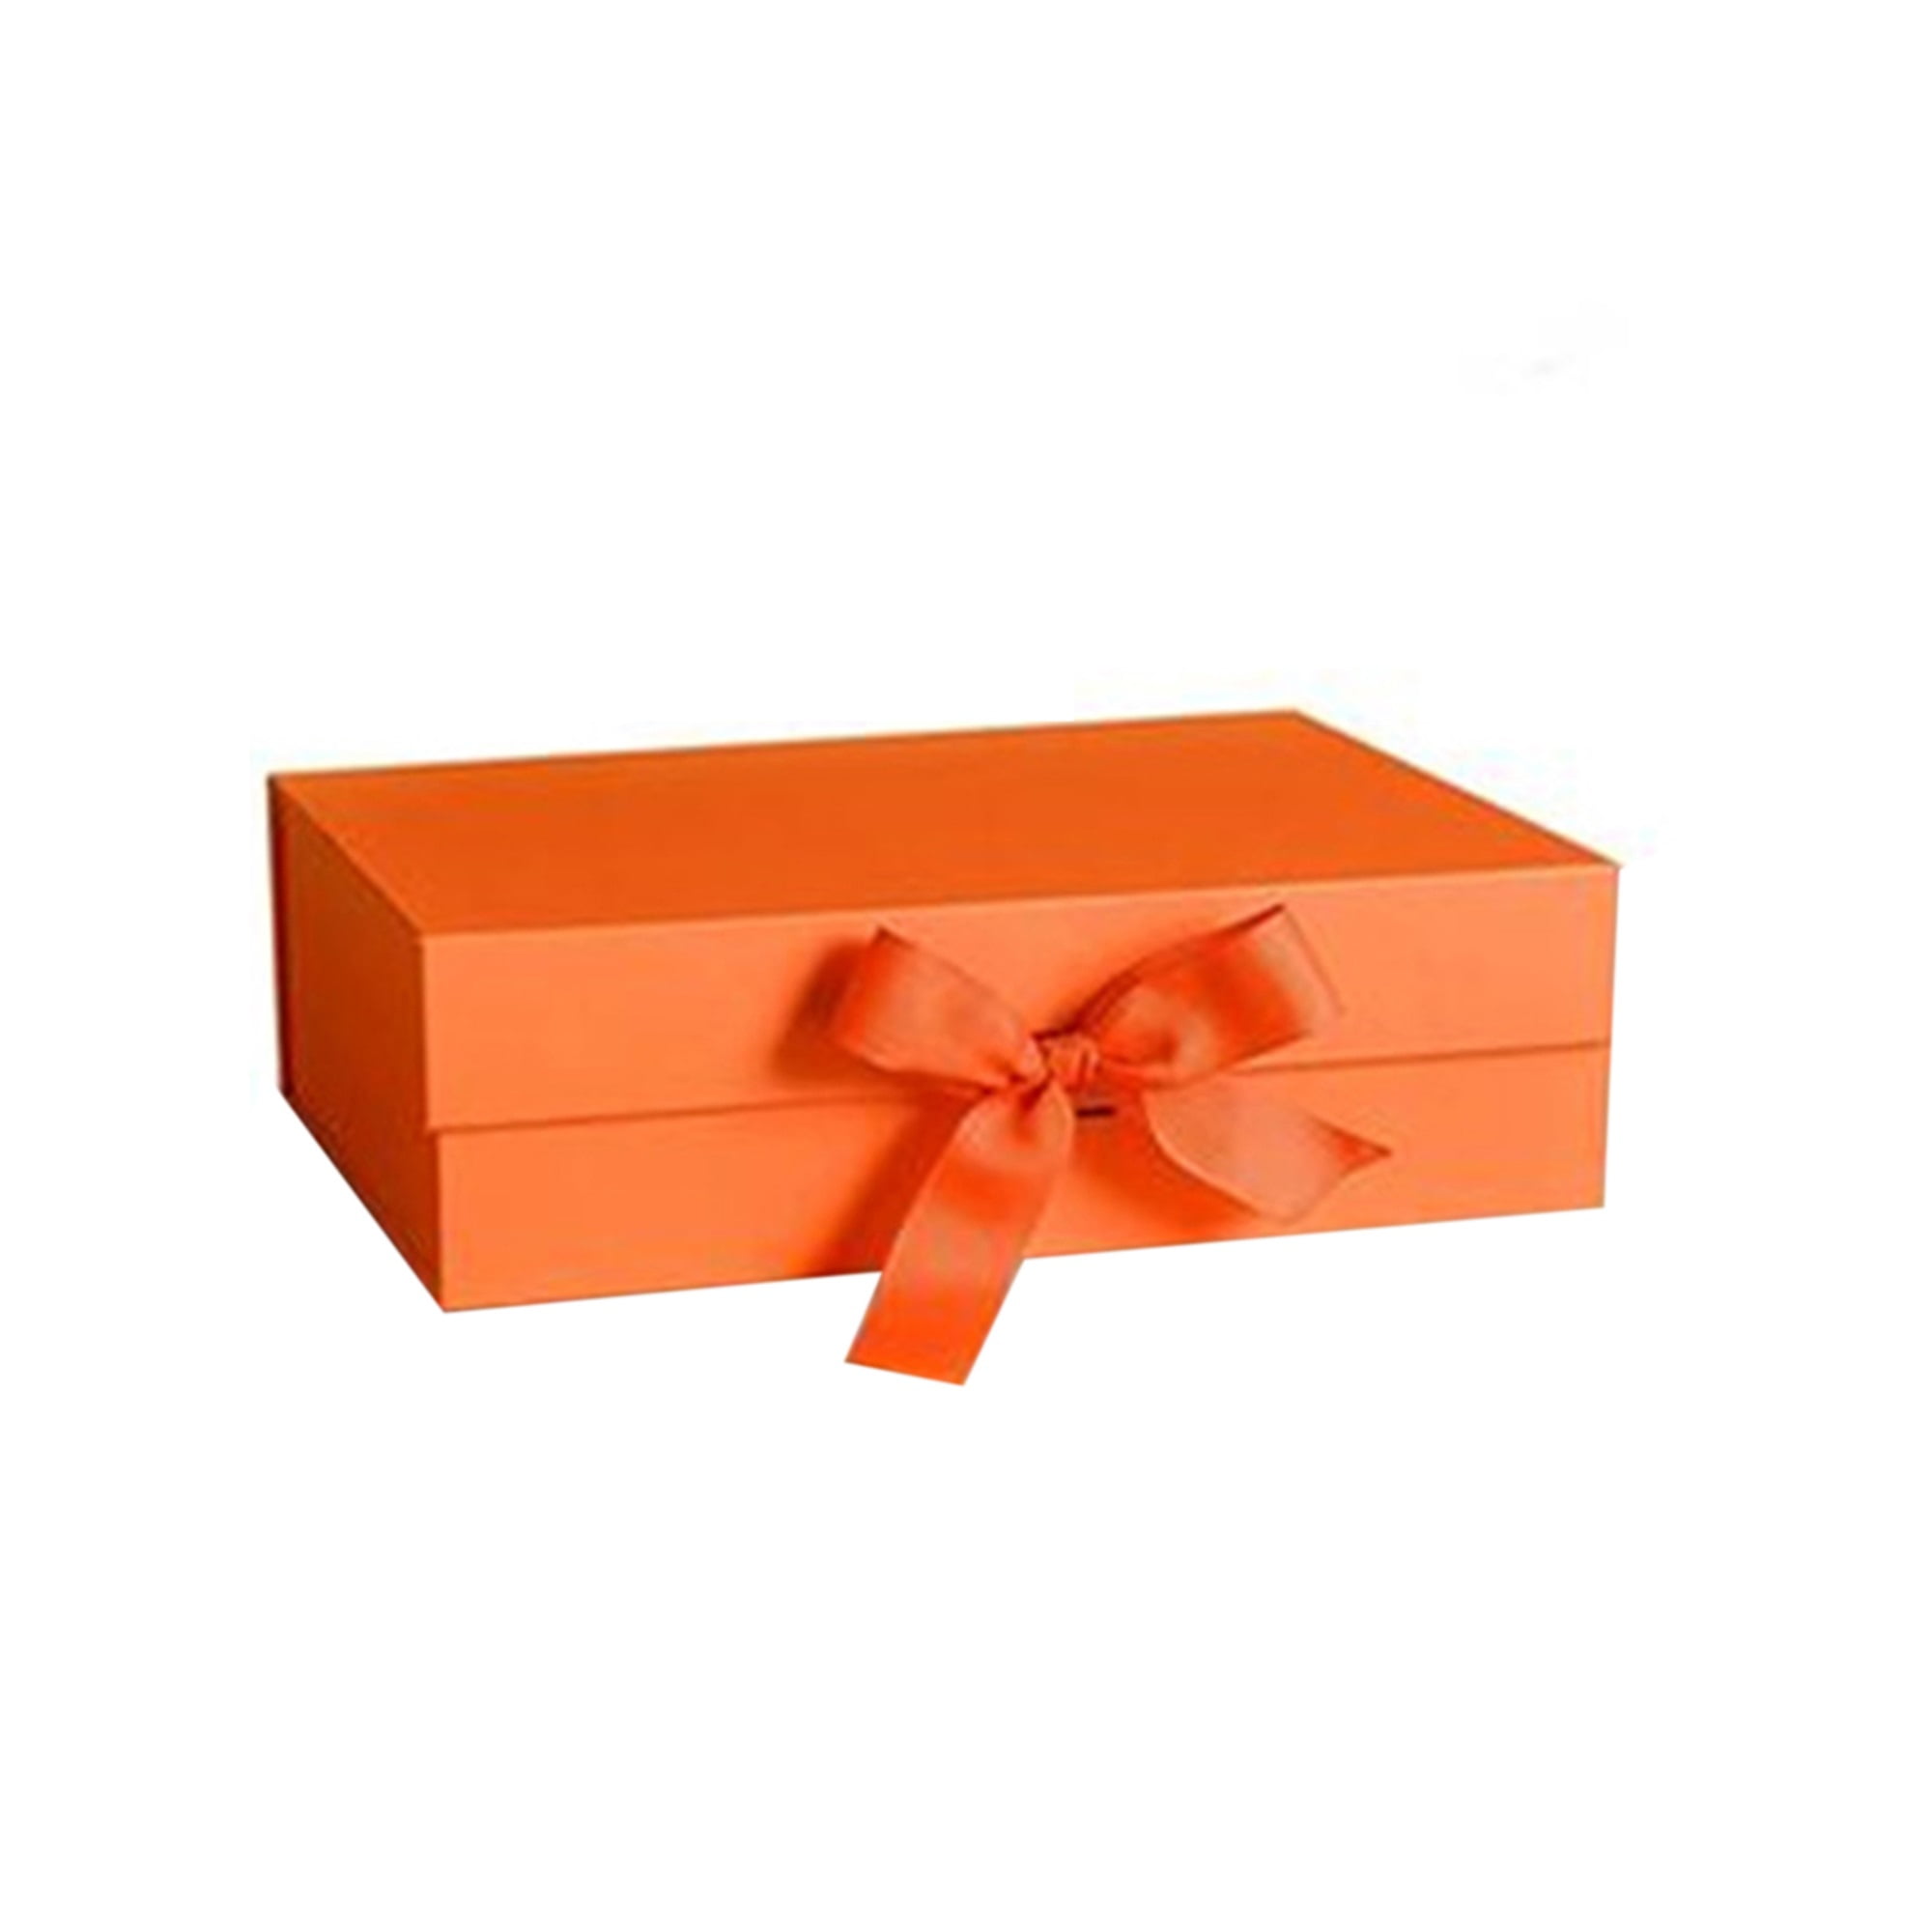 CLEARANCE LOT RING GIFT PRESENTATION BOXES LITTLE SPARKLES DISPLAY BOX BULK RATE 